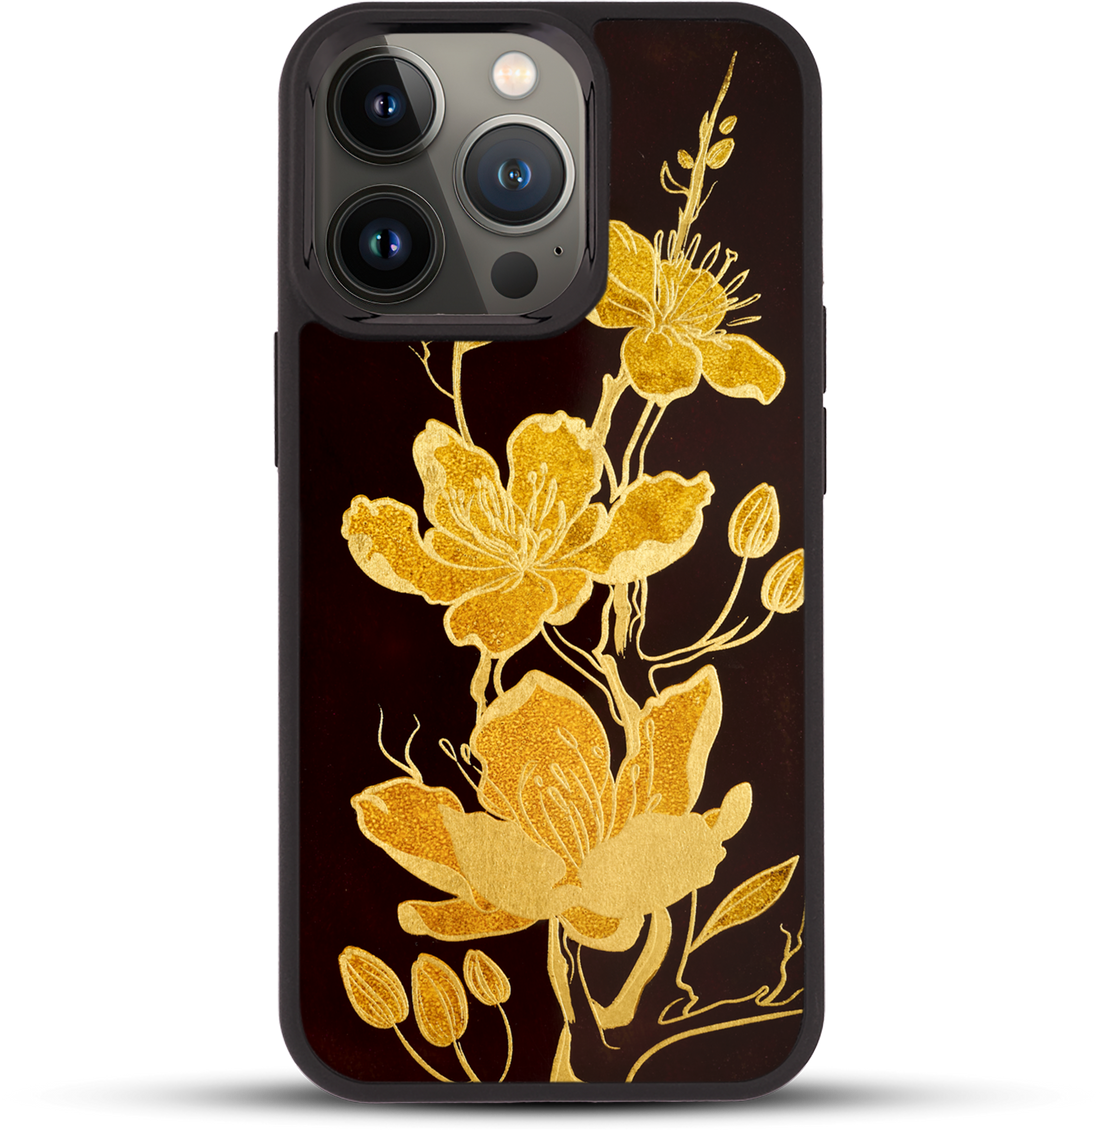 iPhone 13 Pro - Golden Apricot Blossom